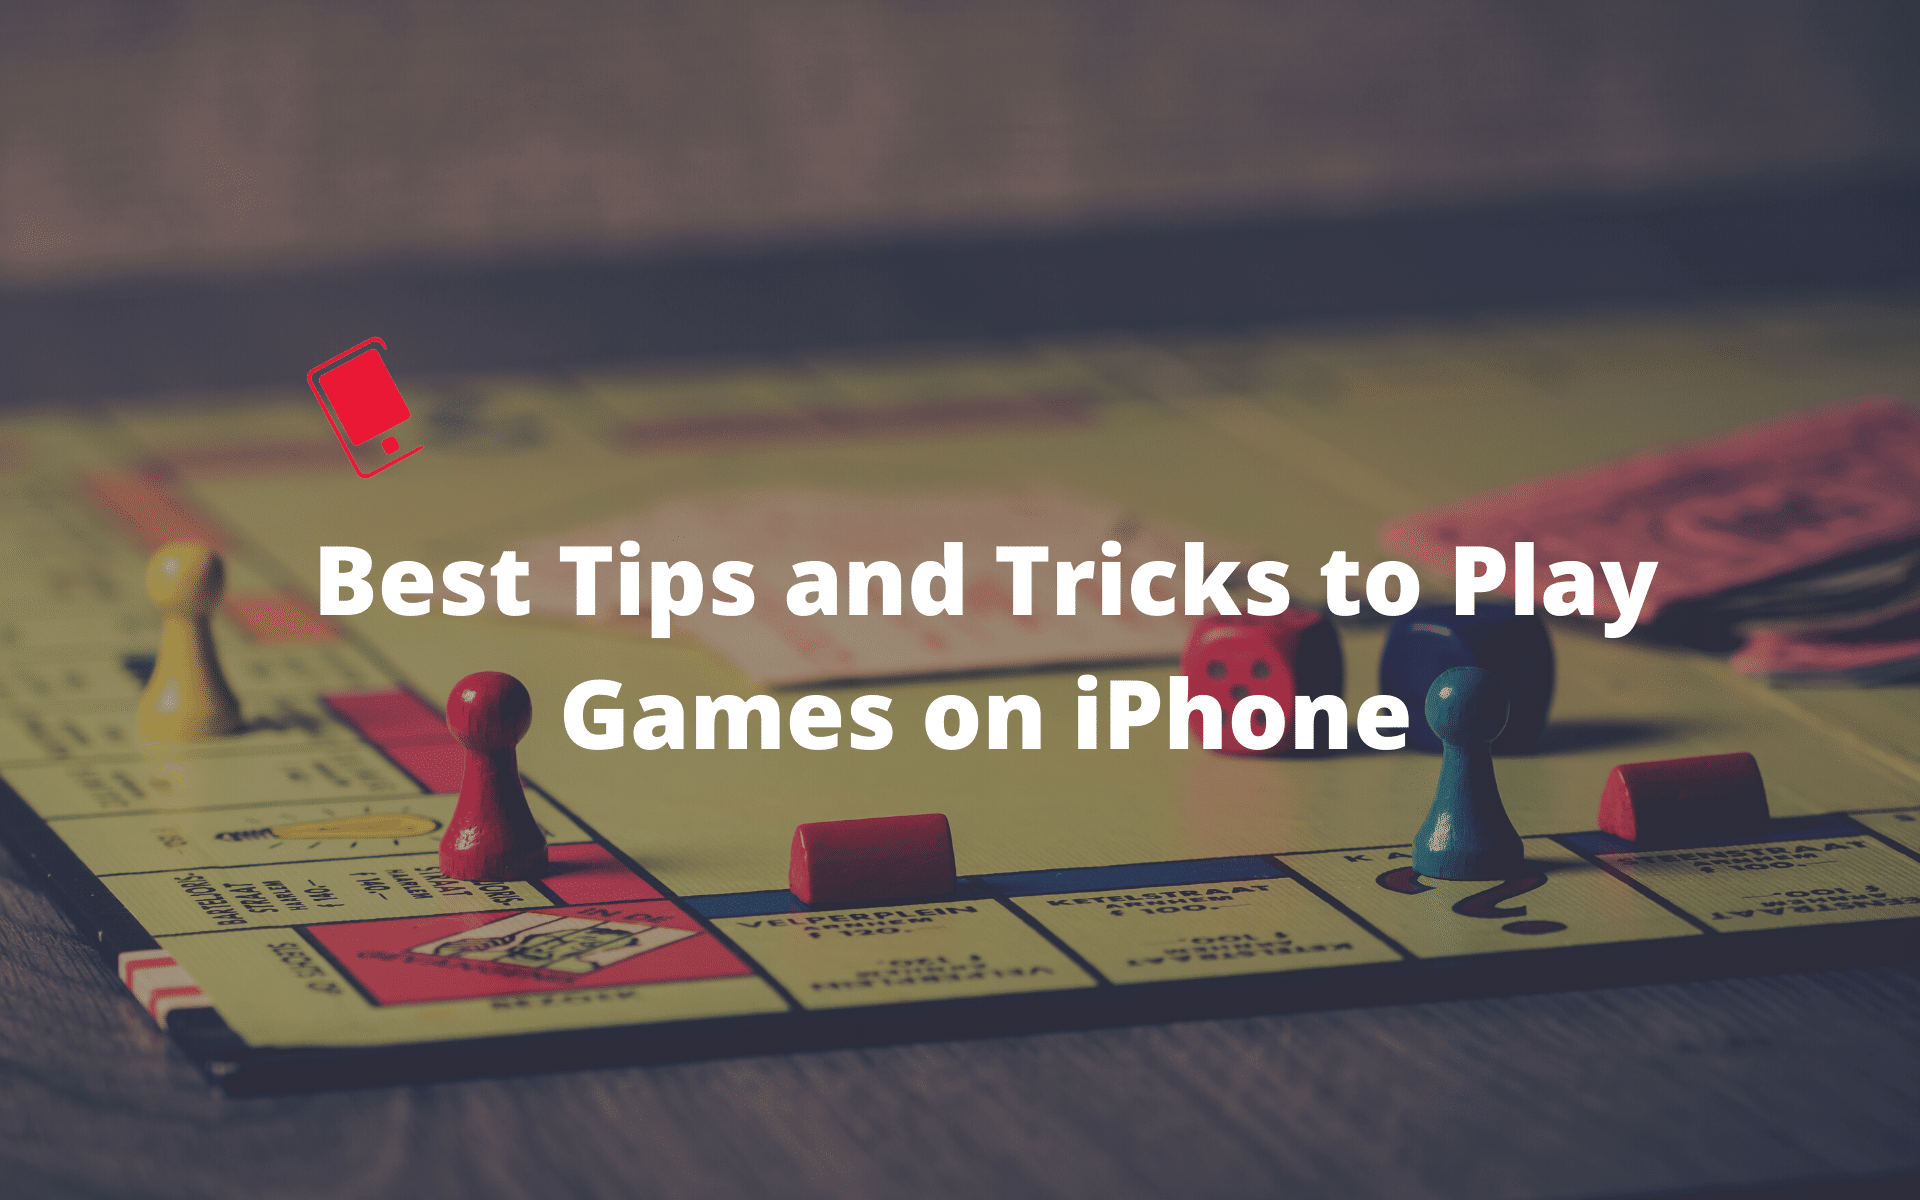 tips to play games on iPhone